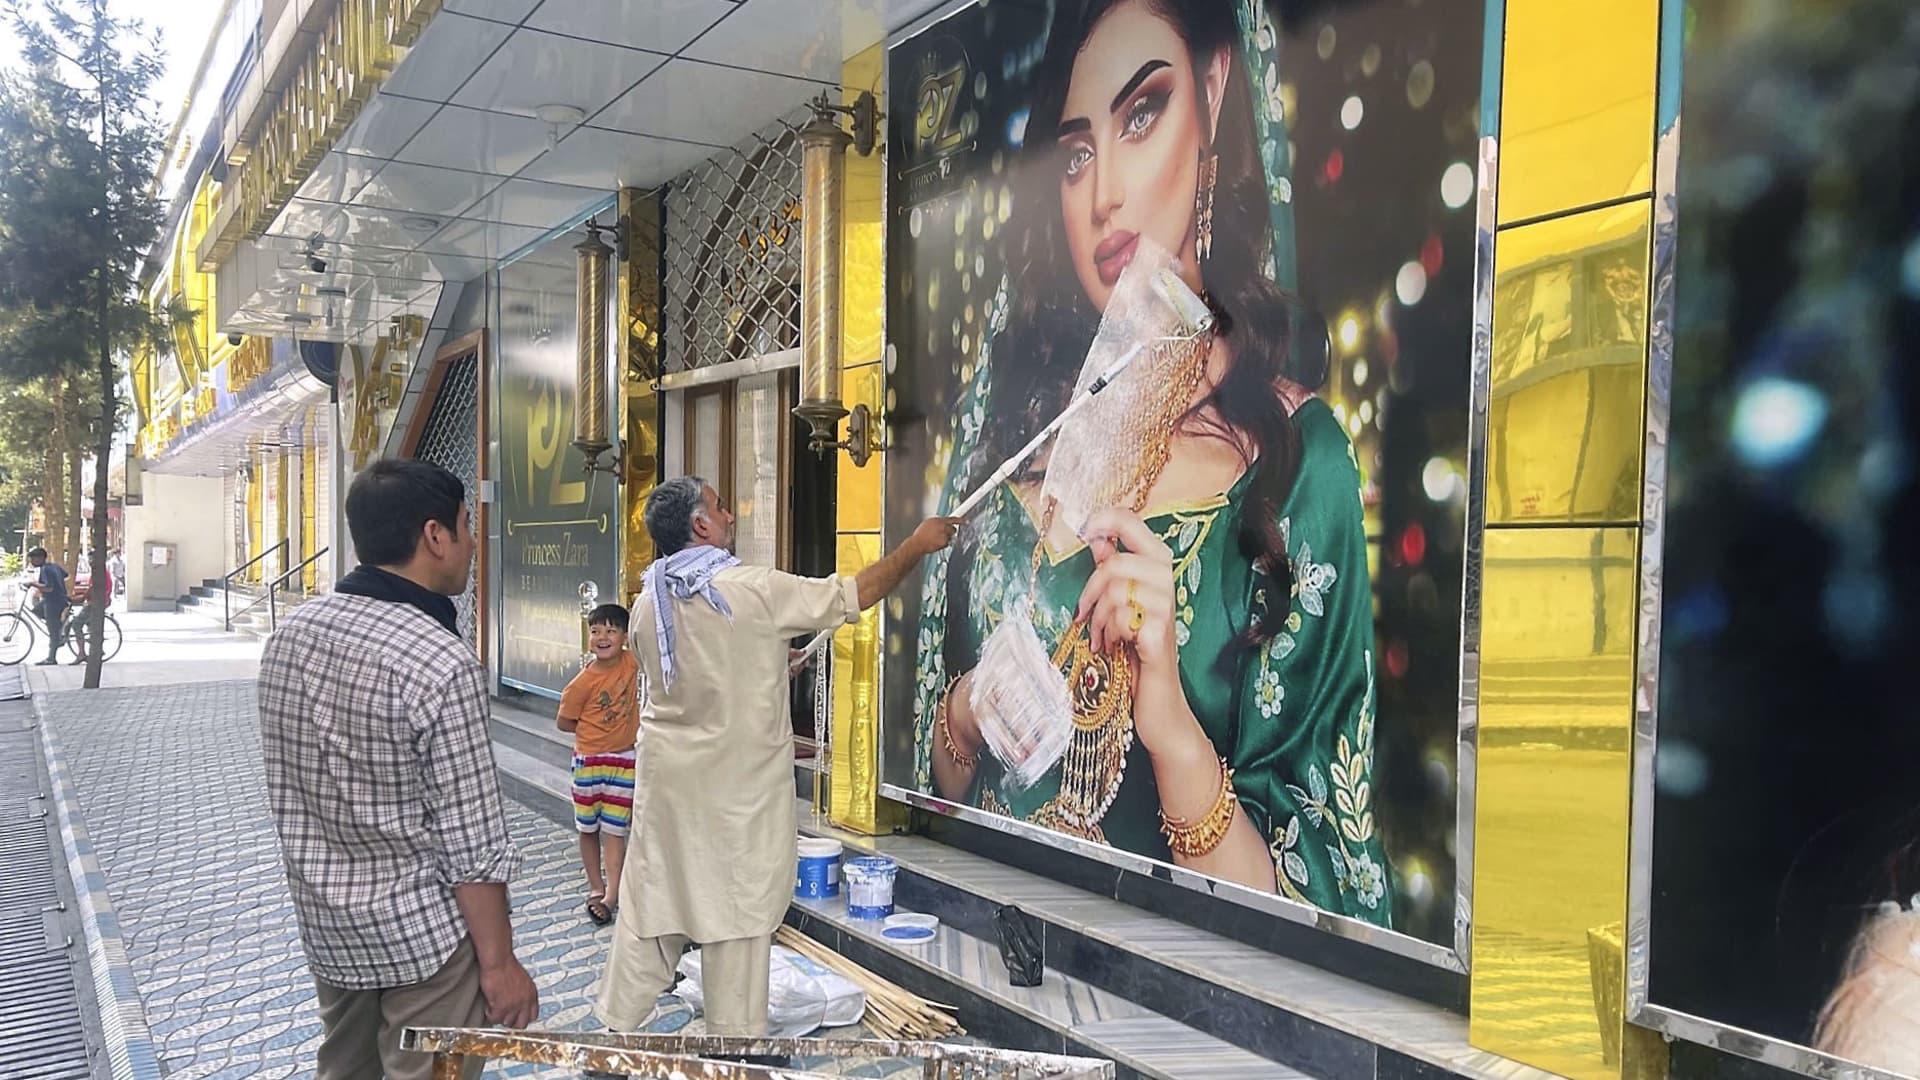 A worker at a beauty salon paints over a large photo of a woman on the wall in Kabul on Aug. 15, 2021, following news that the Taliban swept into the Afghan capital.